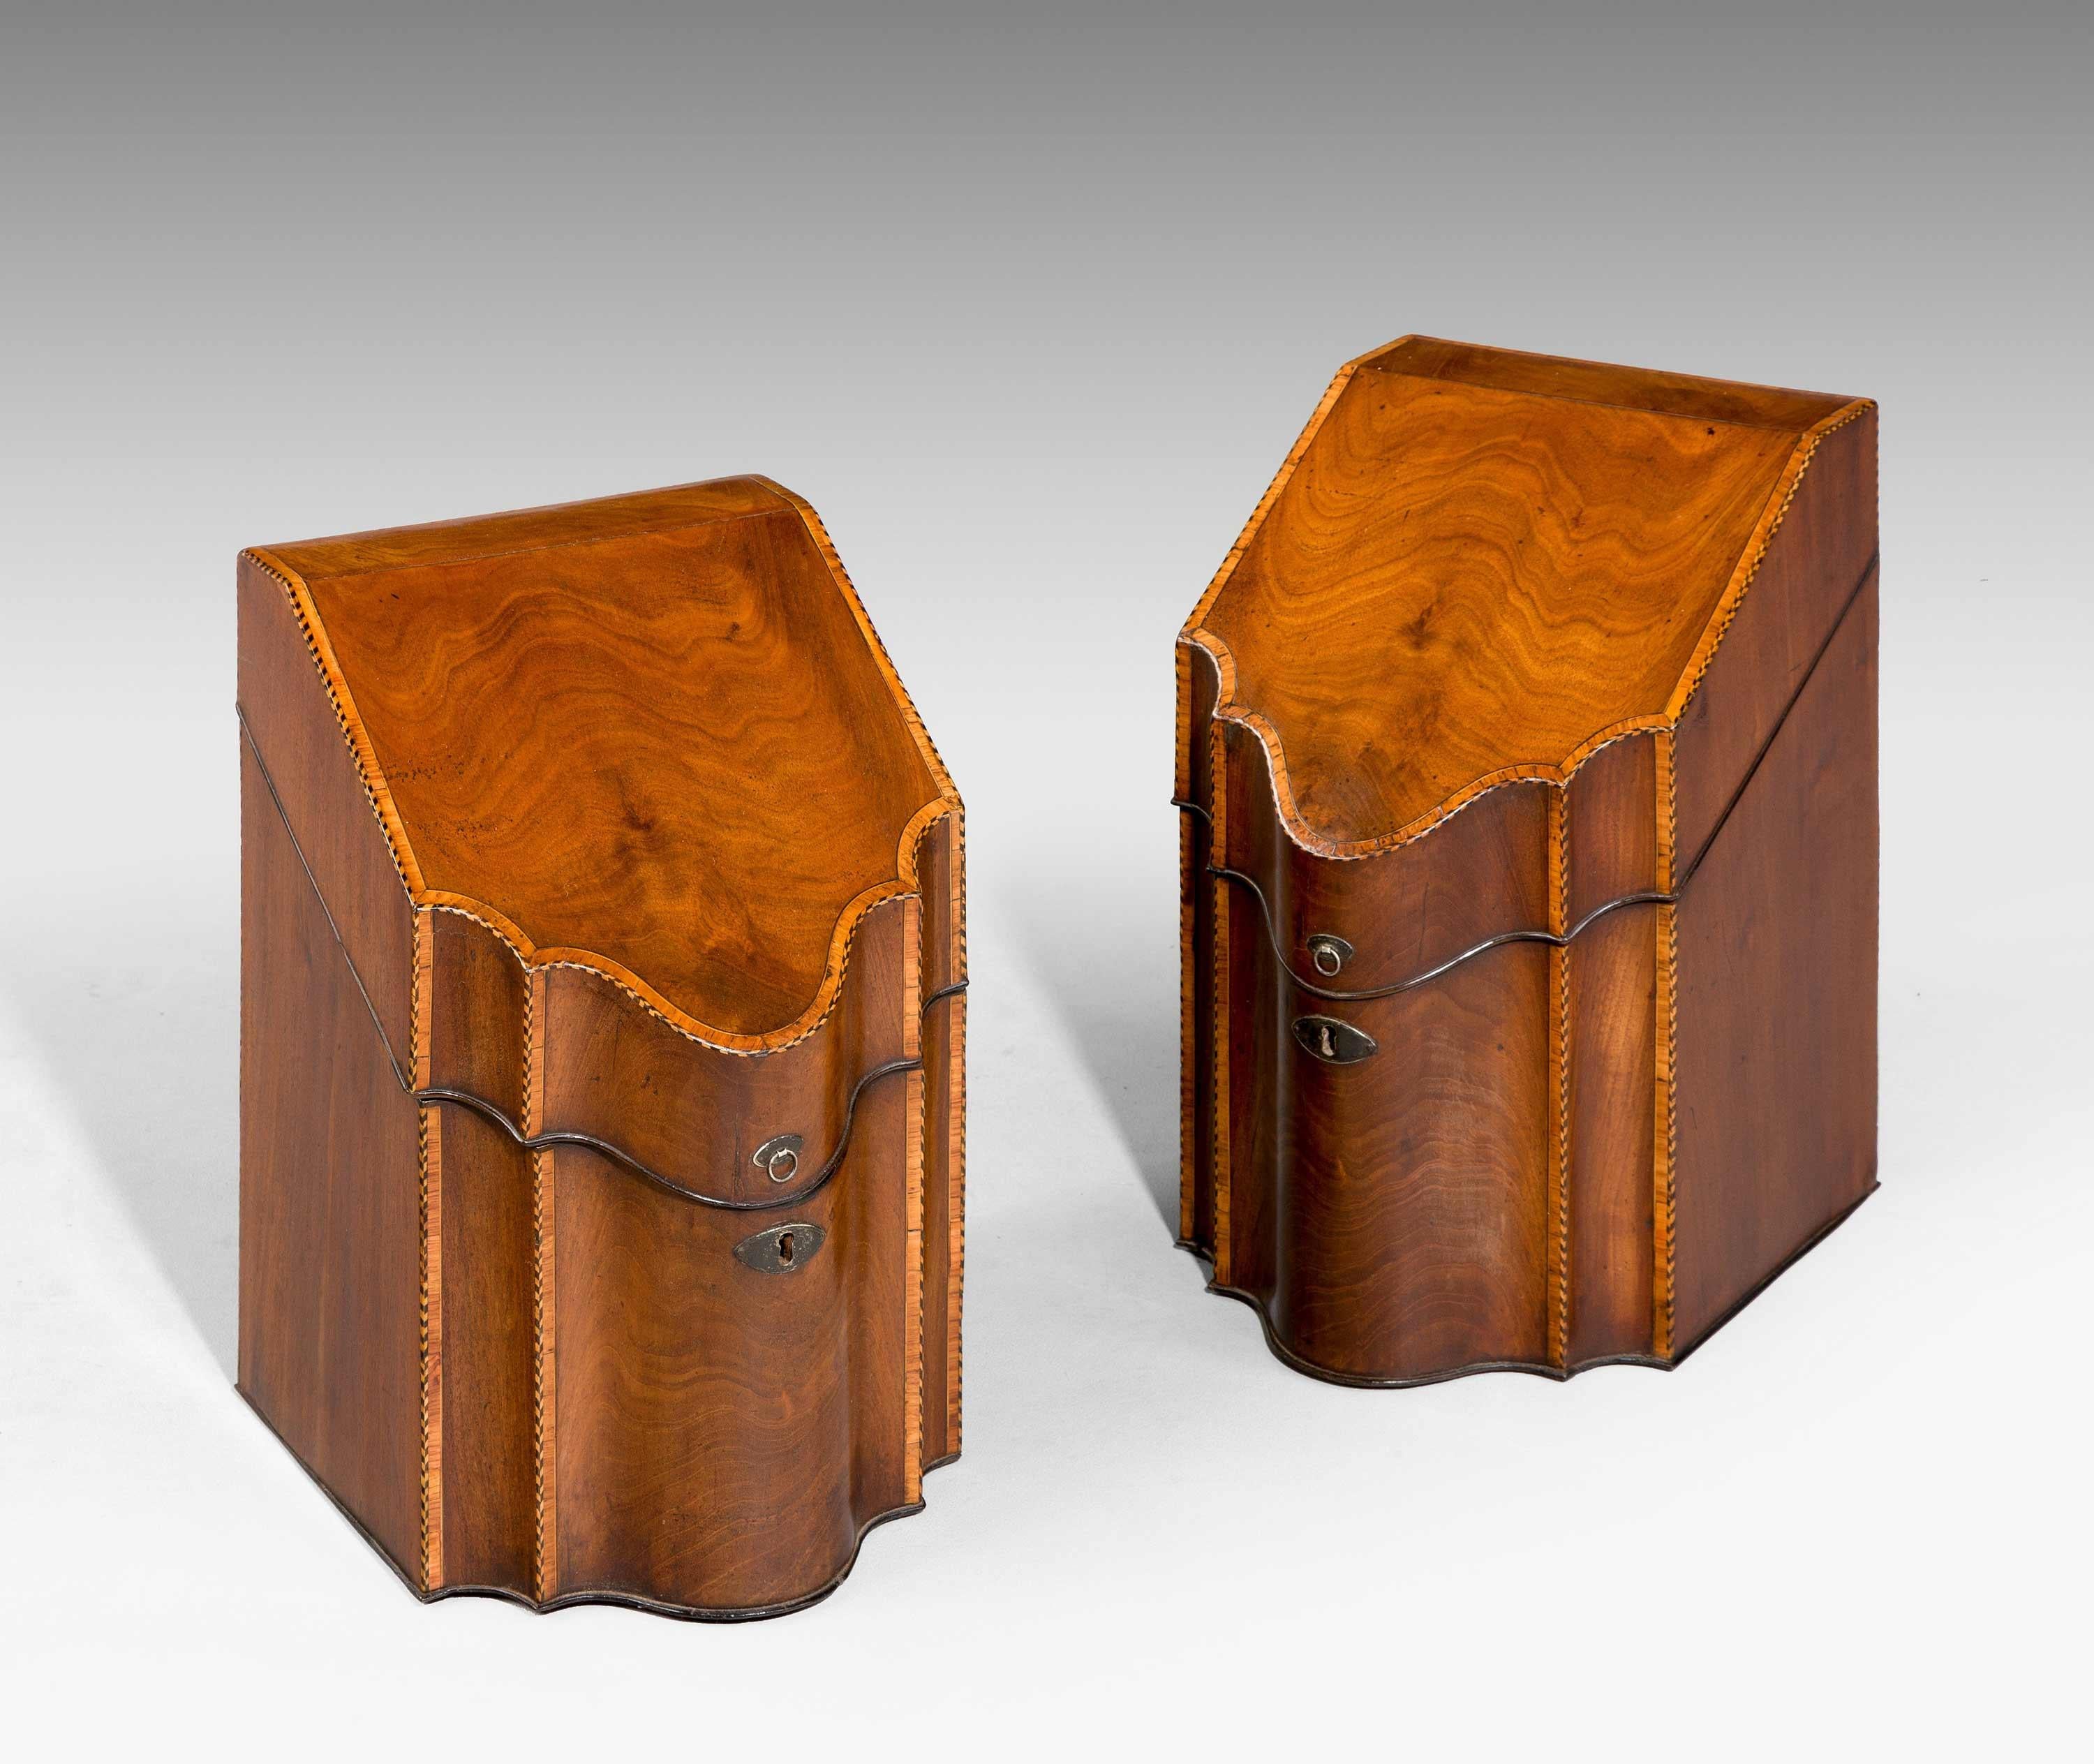 A very good pair of George III period serpentine mahogany knife boxes with kingwood crossbanding and fine chequered ebony and boxwood line edge. Excellent figured timbers, well fitted interior and fine old Sheffield plated escutcheon and ring